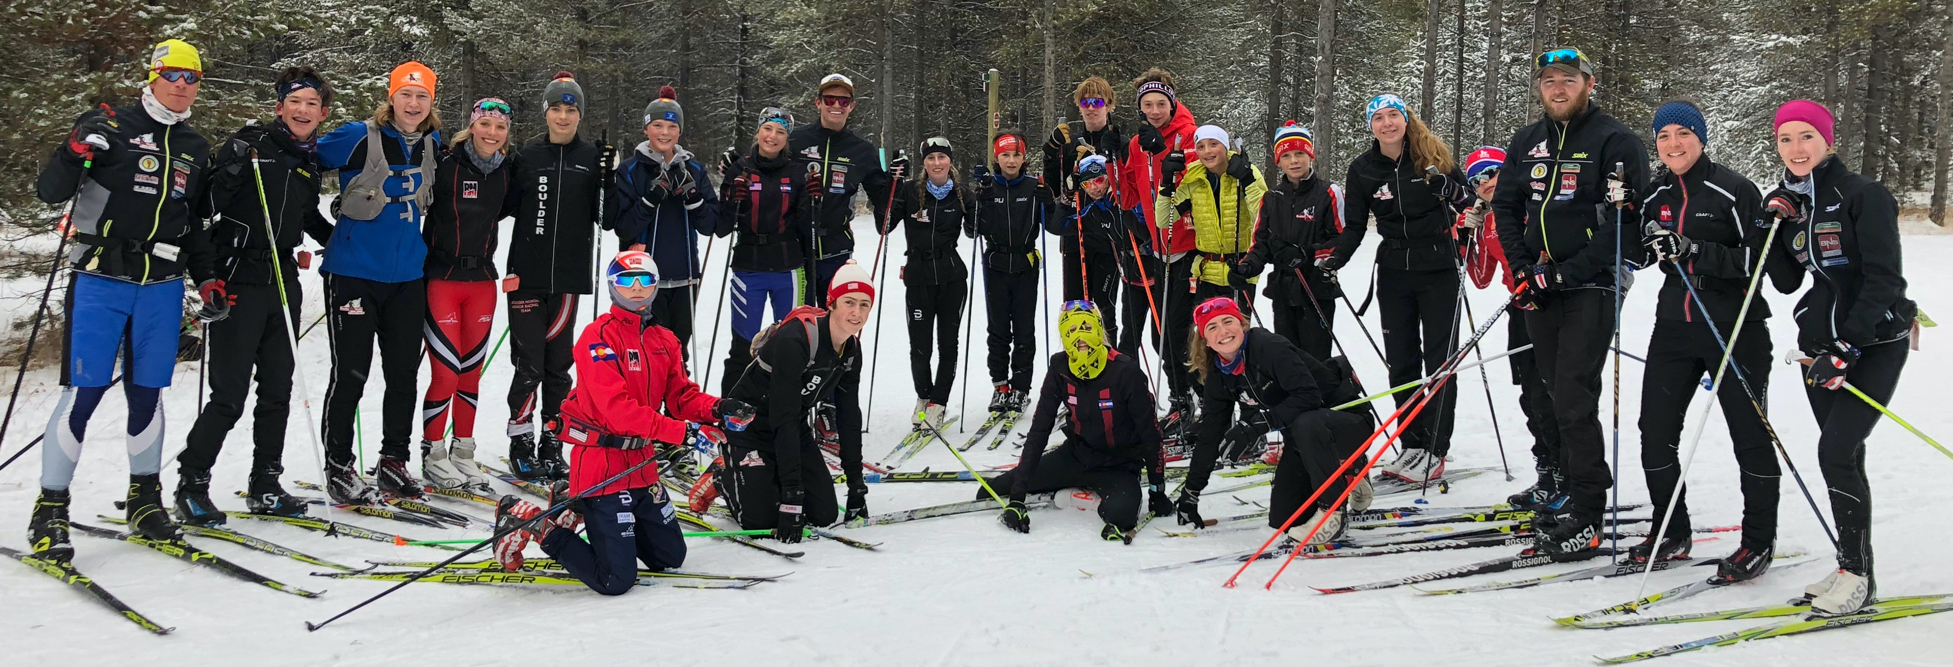 BNJRT team photo at West Yellowstone 2018